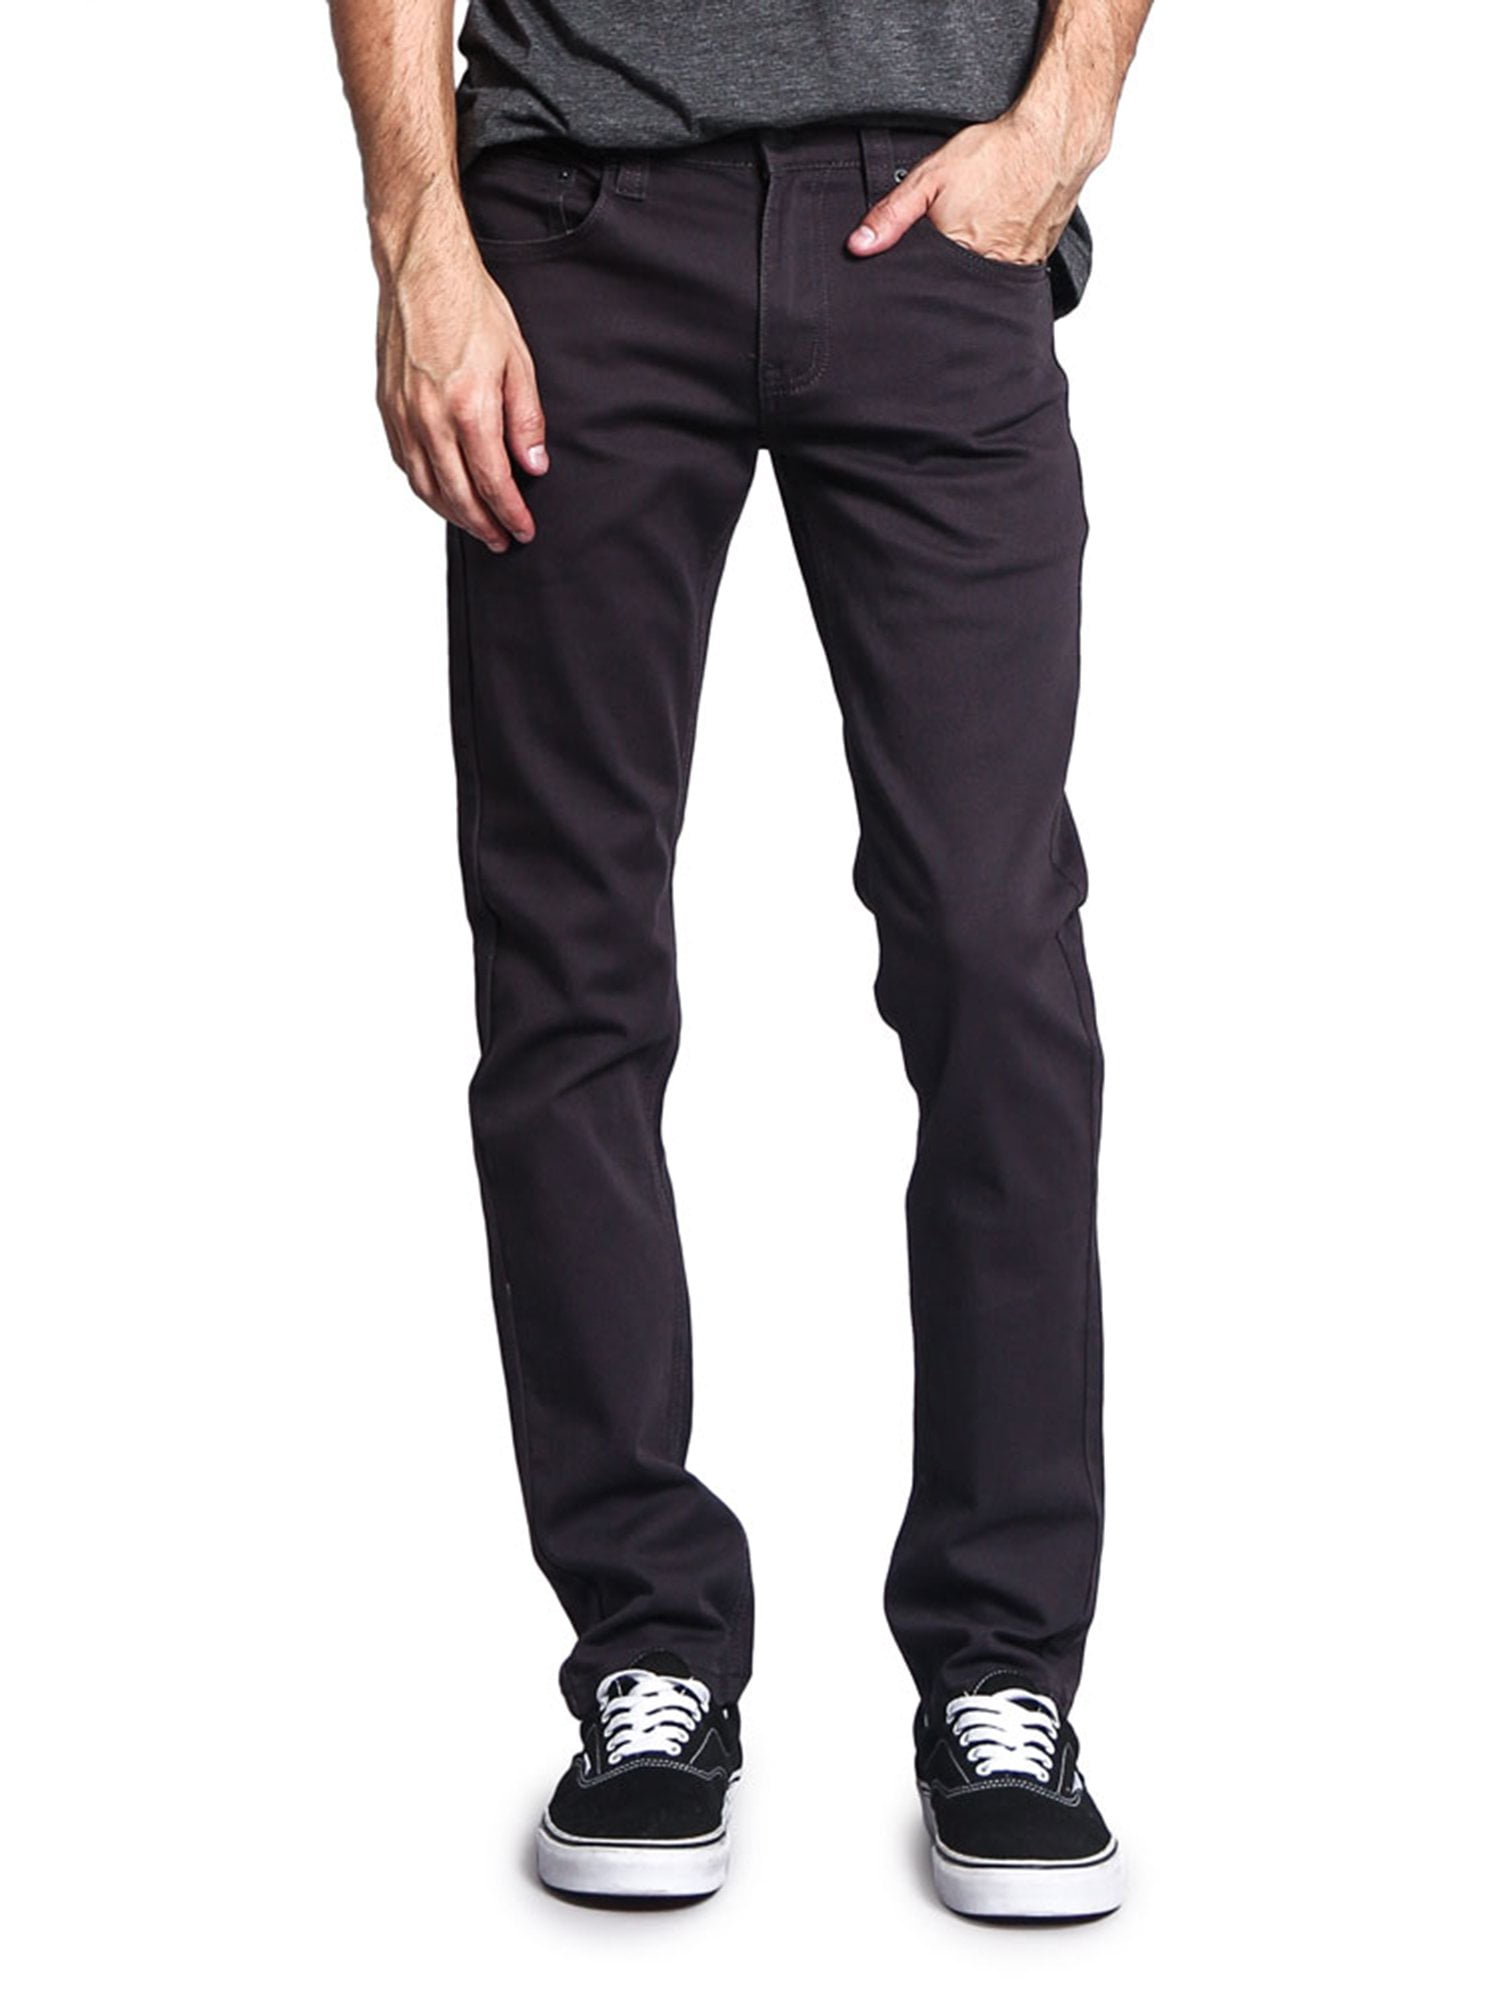 Victorious - Victorious Men's Skinny Fit Color Stretch Jeans DL937 ...